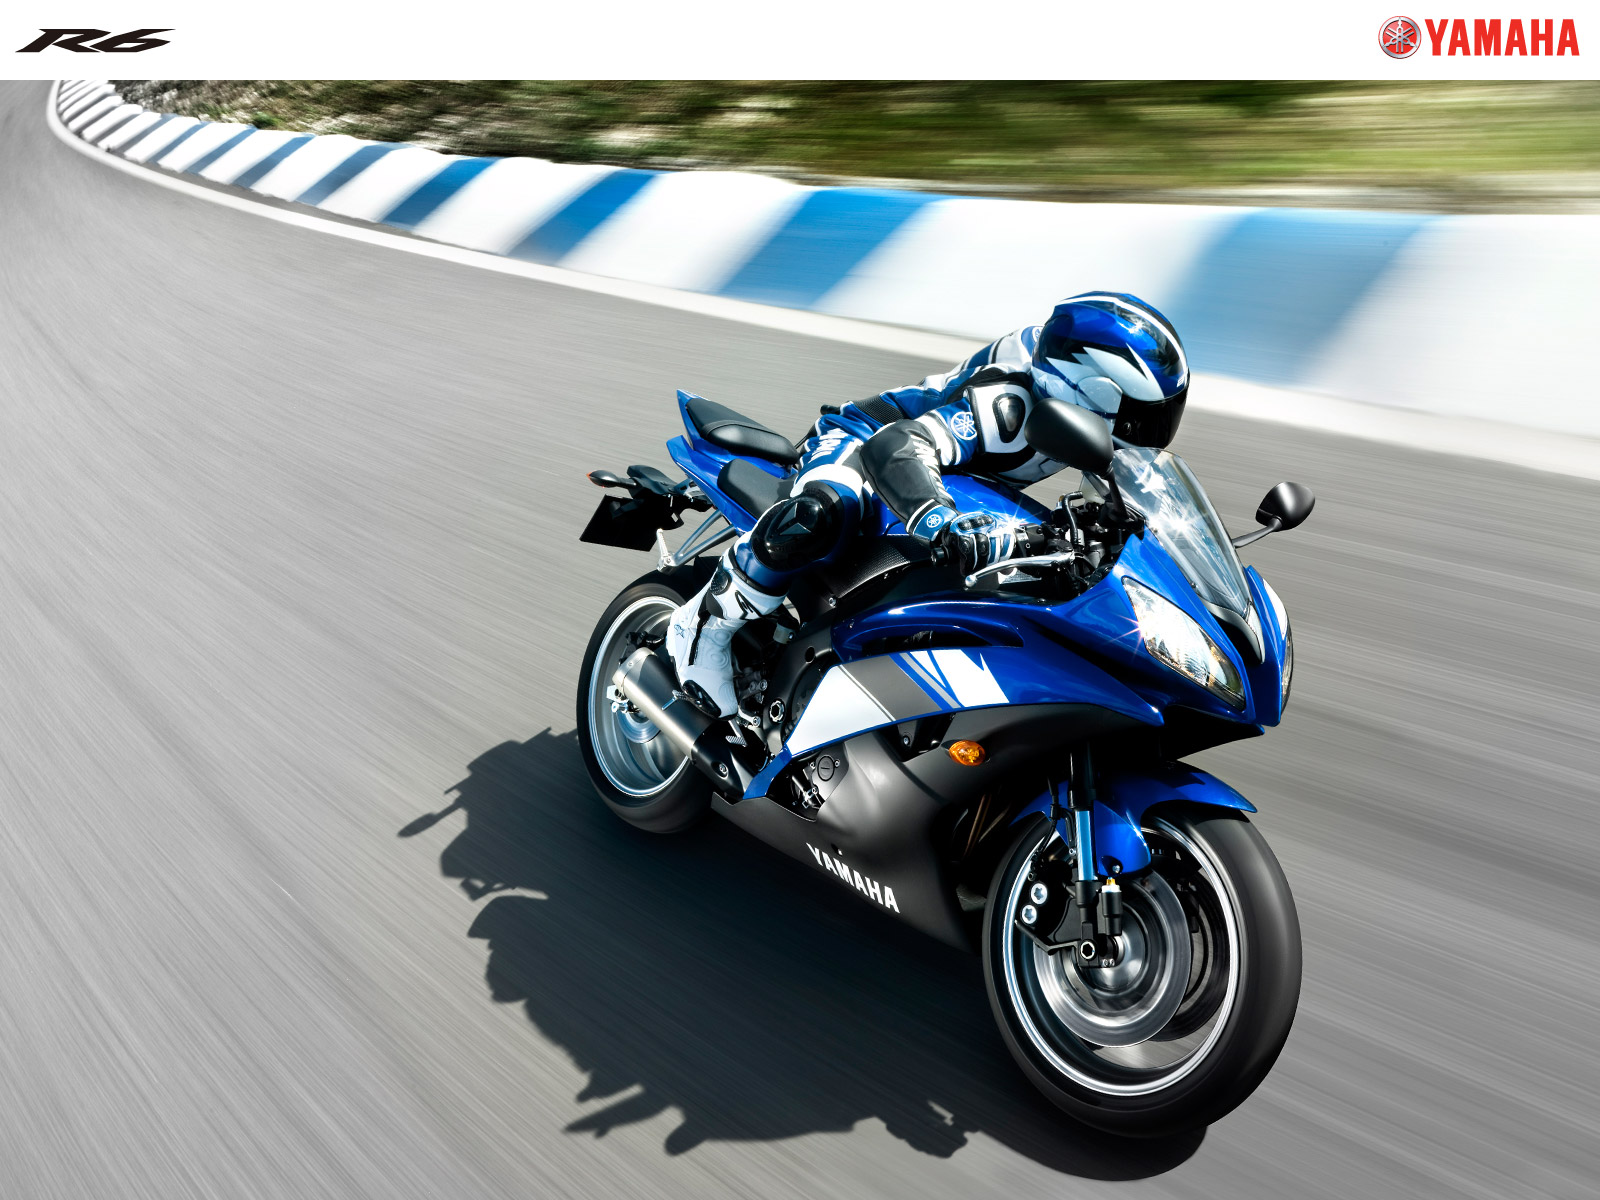 Ments To HD Yamaha Wallpaper Background Image For